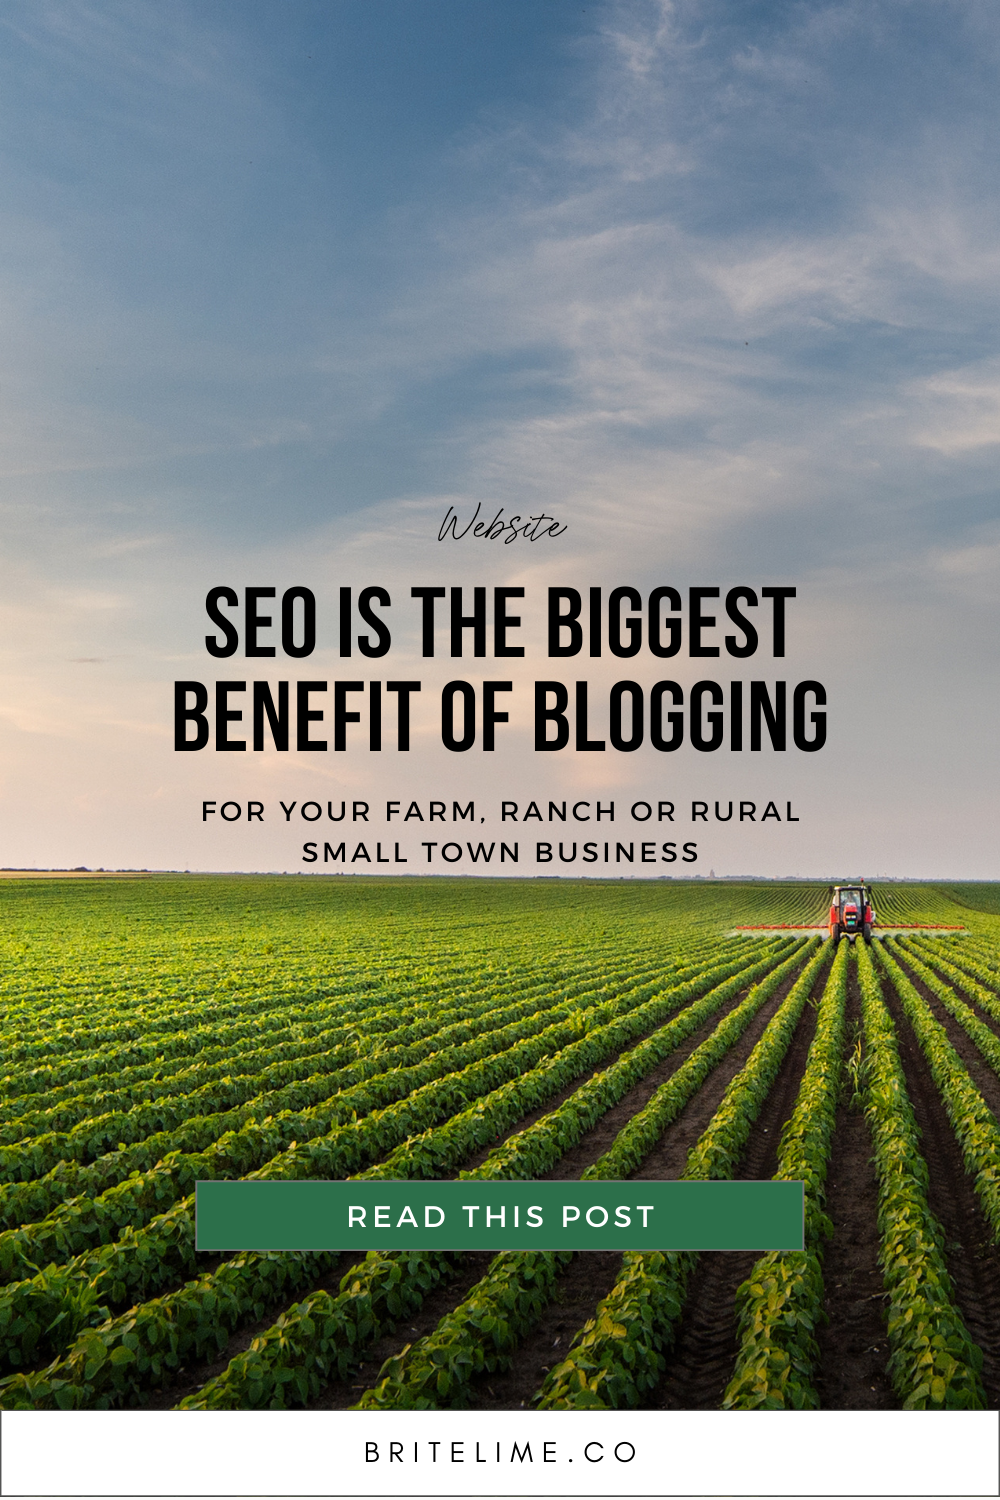 Image of a tractor and row crops with text that reads: SEO is the biggest benefit of blogging for your farm, ranch or rural small town business.